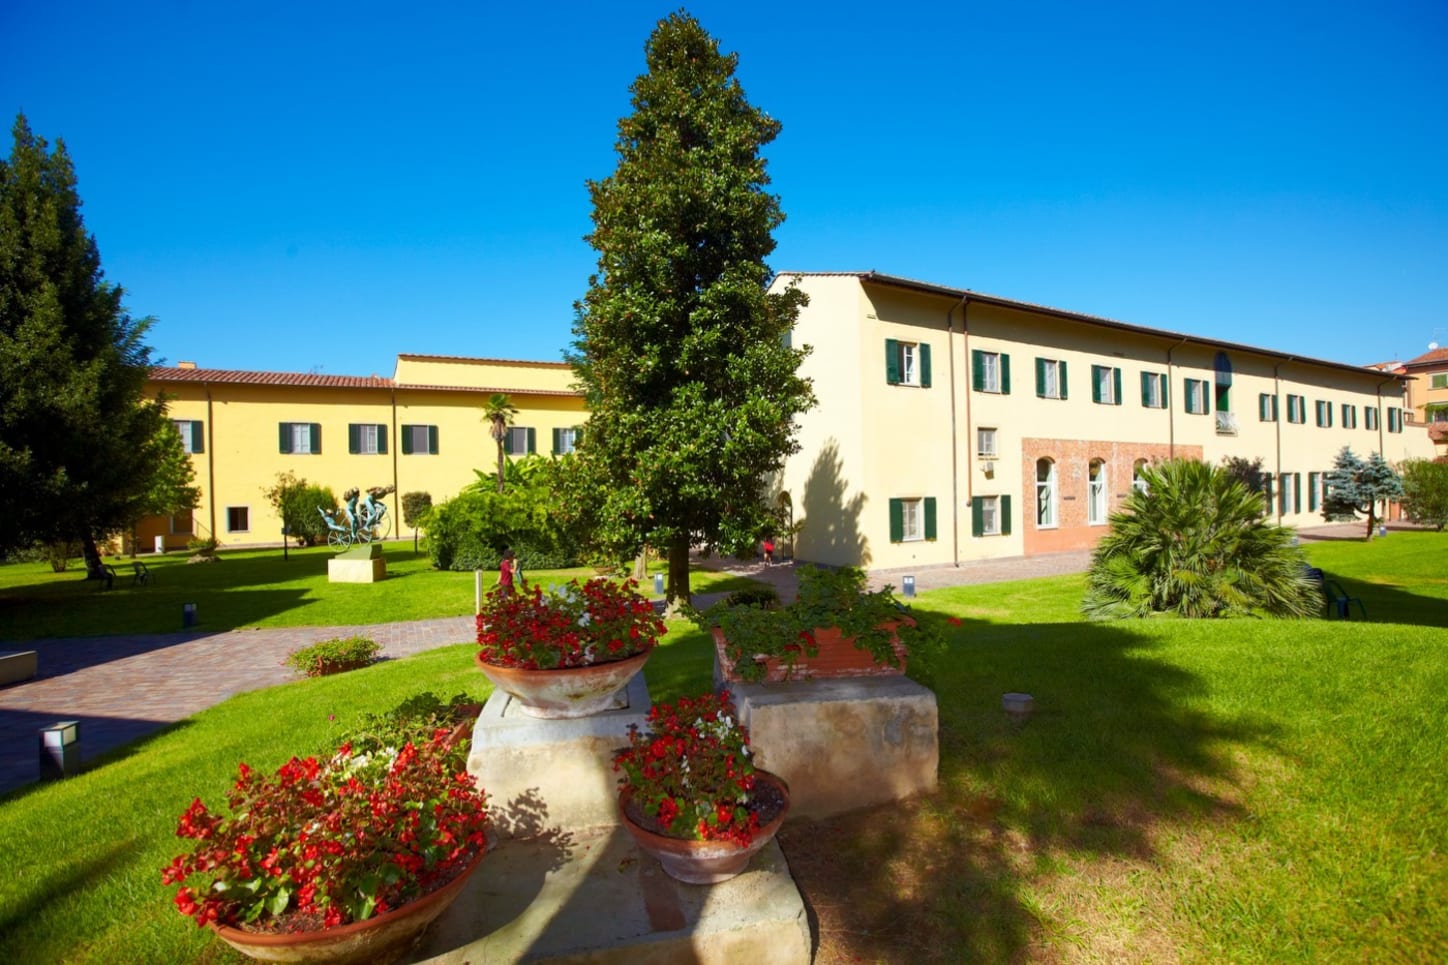 Scuola Superiore Sant’Anna Planet Health- A multidisciplinary approach to preventing and treating the effects of planetary health disruption on human health